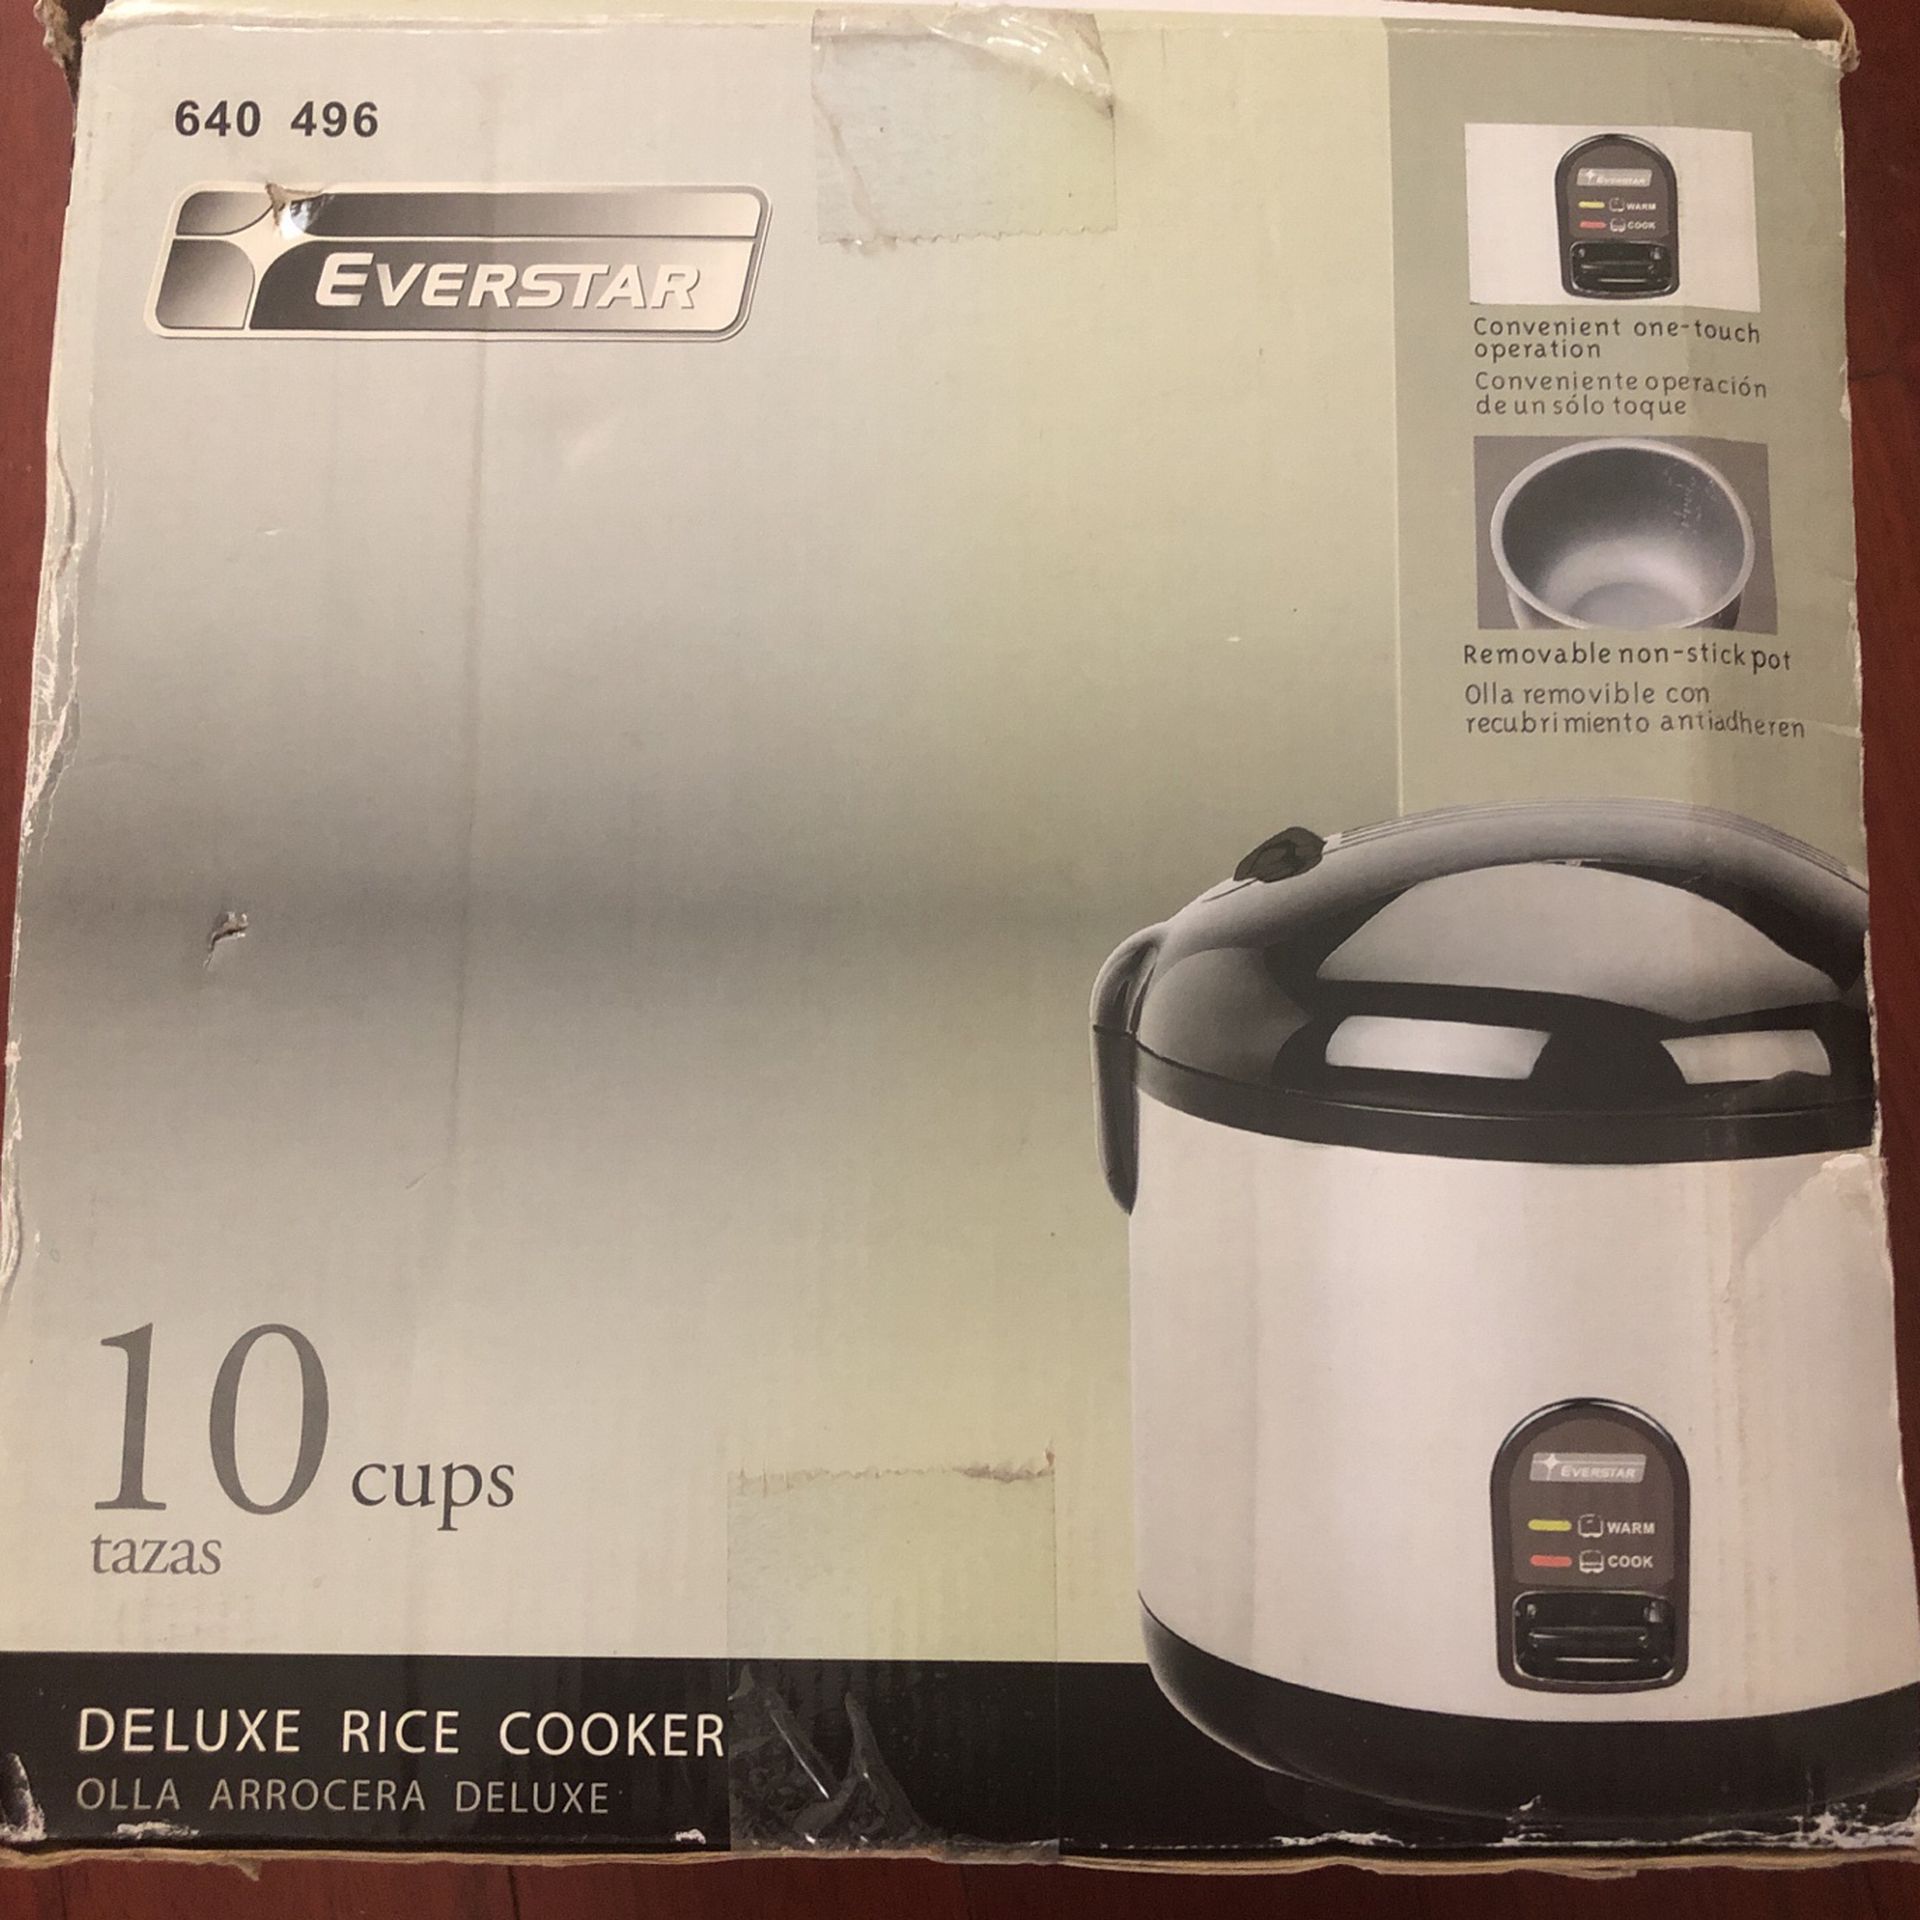 Oster Digital Rice Cooker for Sale in Campbell, CA - OfferUp